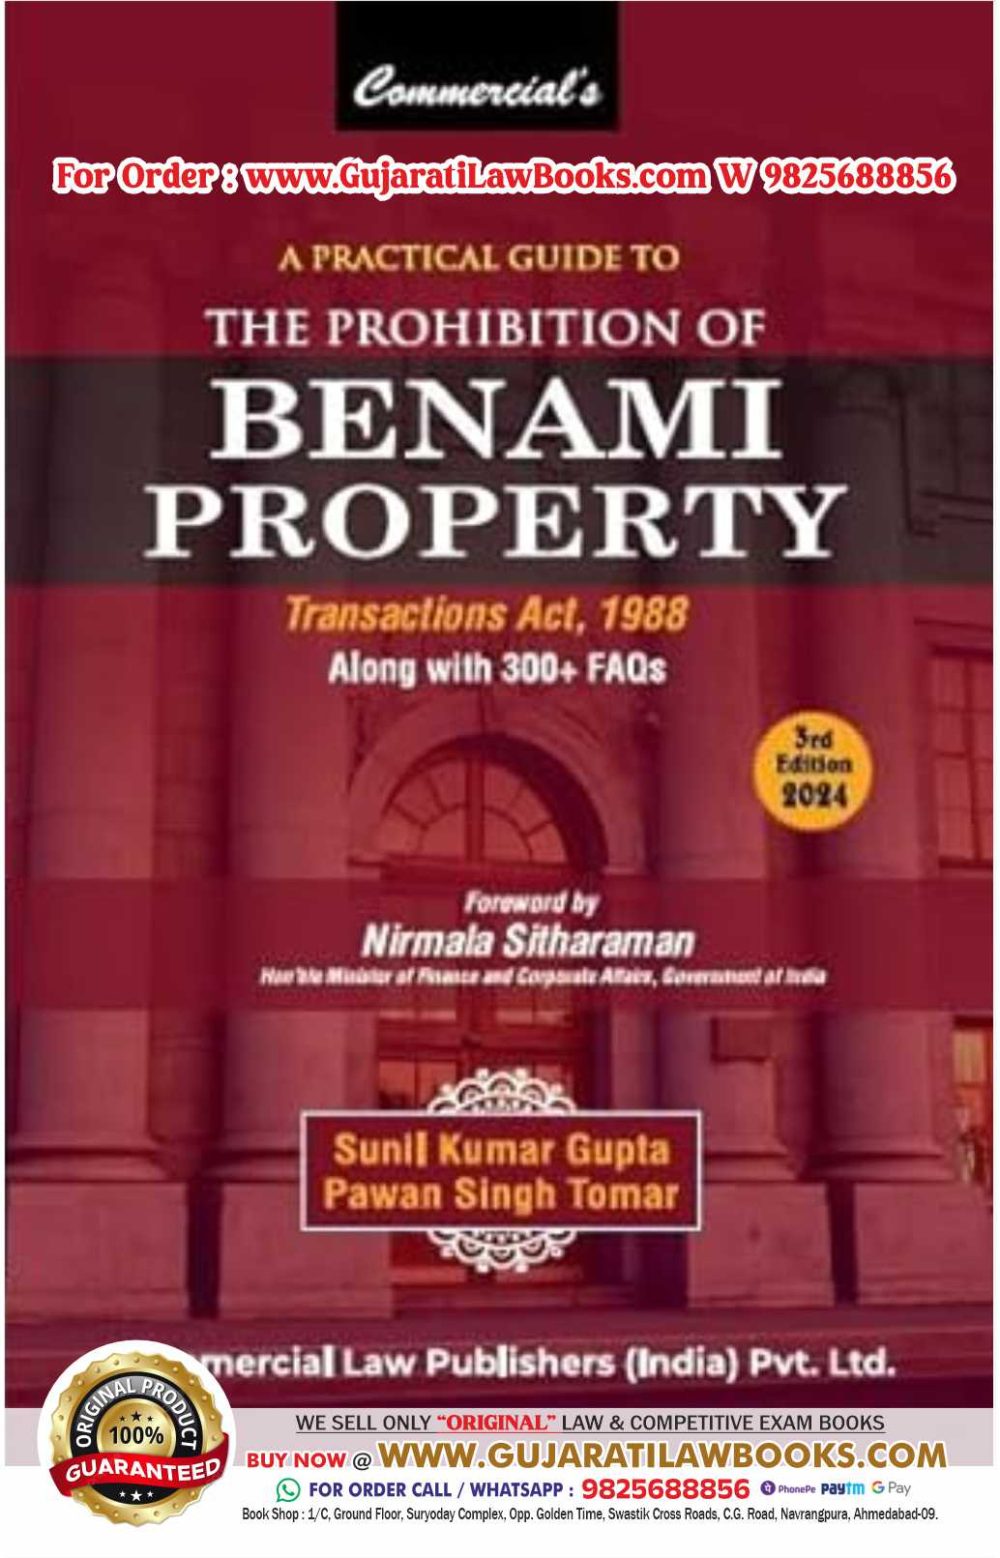 A Practical Guide to THE PROHIBITION OF BENAMI PROPERTY Transactions Act, 1988 - Latest 3rd Edition 2024 Commercial